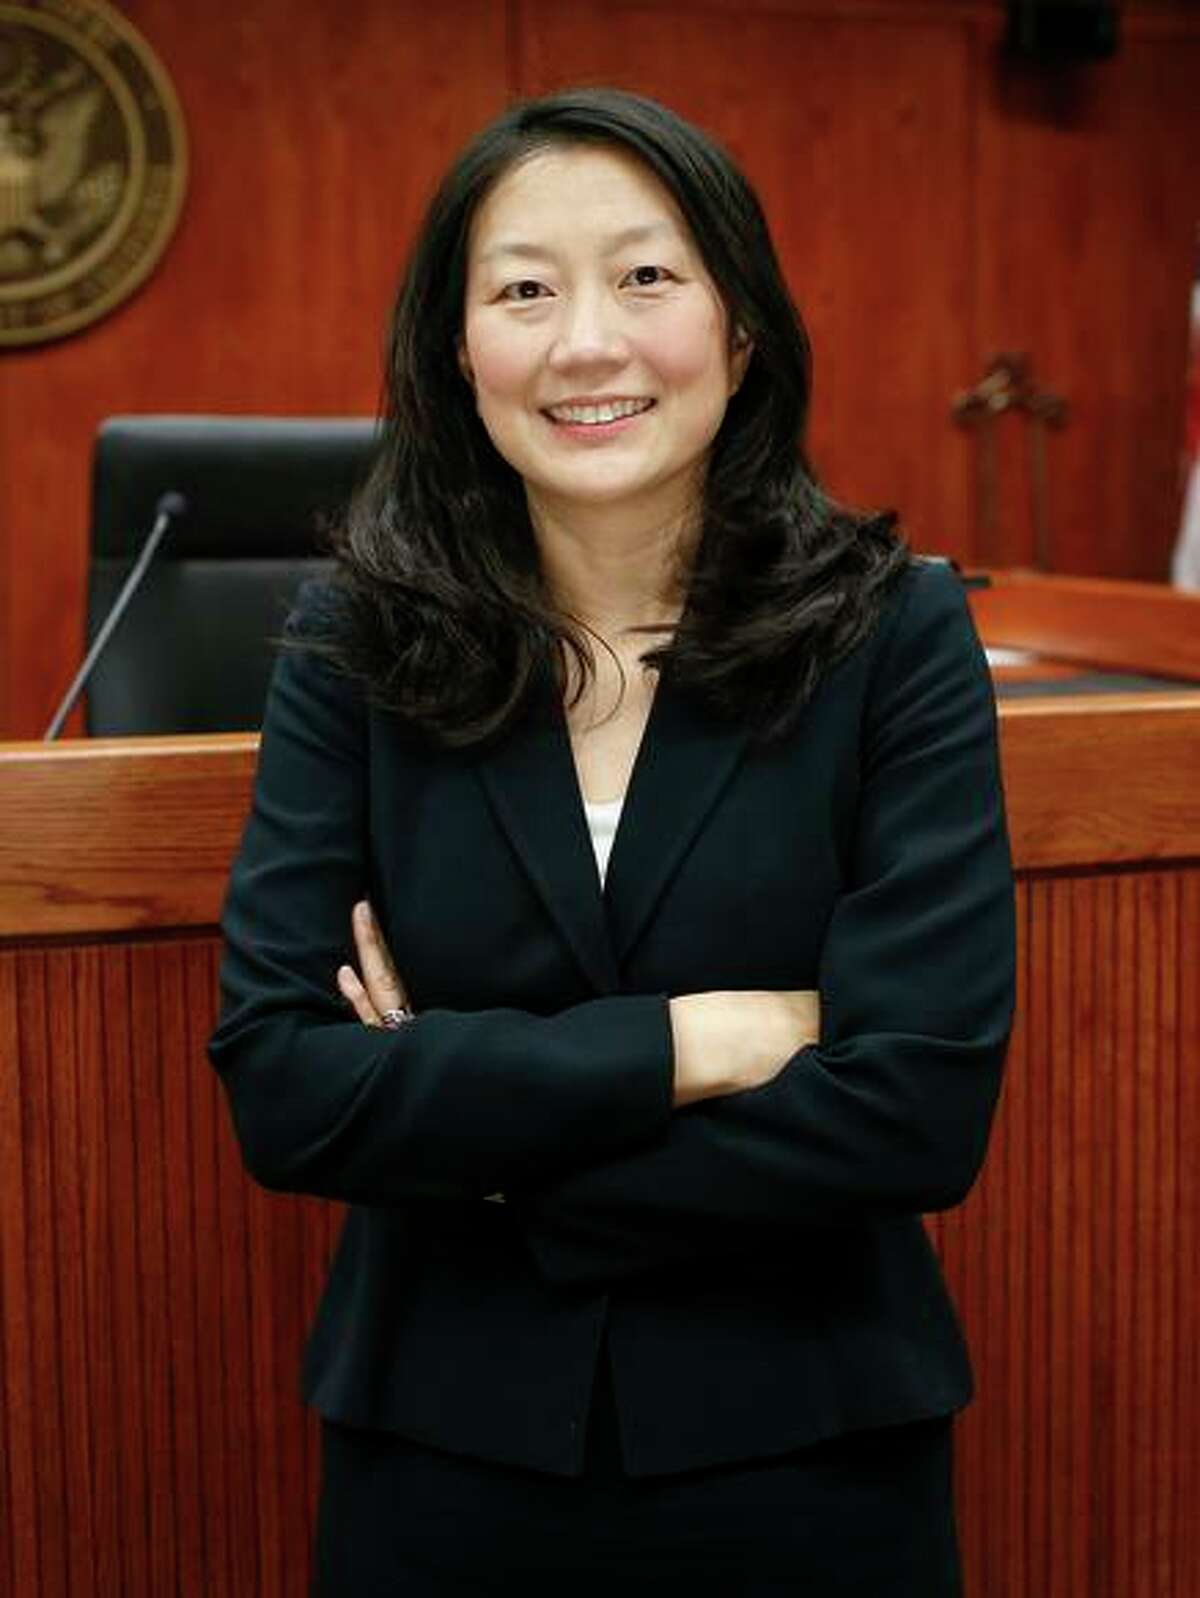 United States District Court Judge Lucy Koh is seen in her Robert F. Peckham Federal Building courtroom on Tuesday, July 29, 2014 in San Jose, Calif.